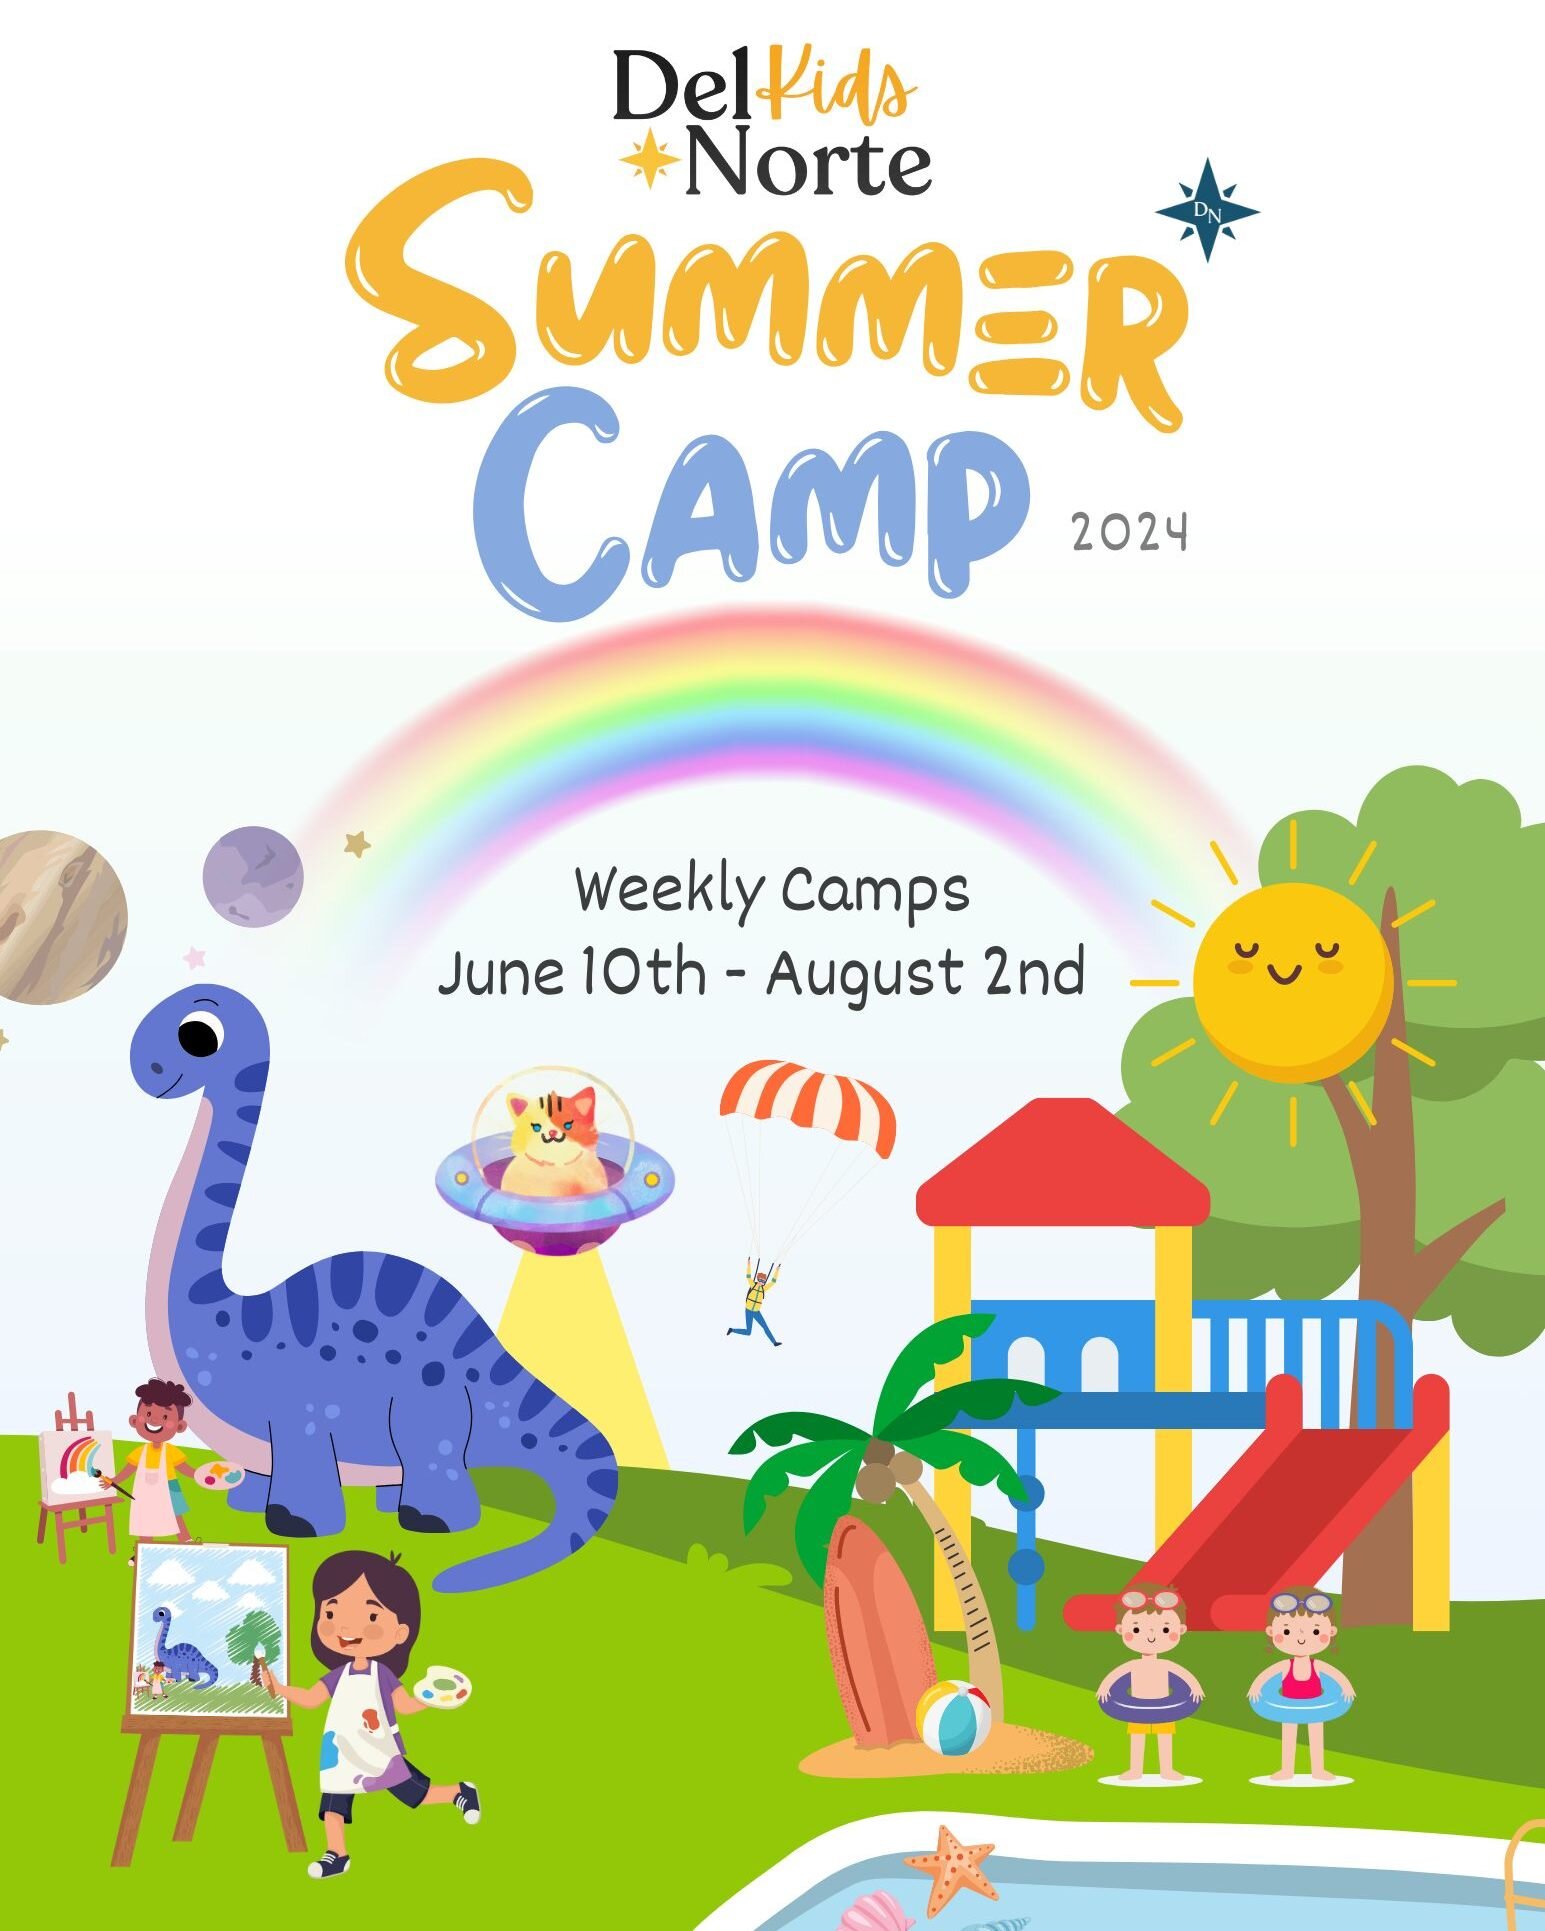 Registration for Del Norte Summer Camp is now open! 

8 Weekly camps:  Monday - Friday 8:00am-5:00pm.

&bull;	6/10-6/14	Mess Fest
&bull;	6/17-6/21	Happy and Healthy
&bull;	6/24-6/28	Beach Week 
&bull;	7/1-7/5  Mission Possible
&bull;	7/8-7/12  Kid Ch